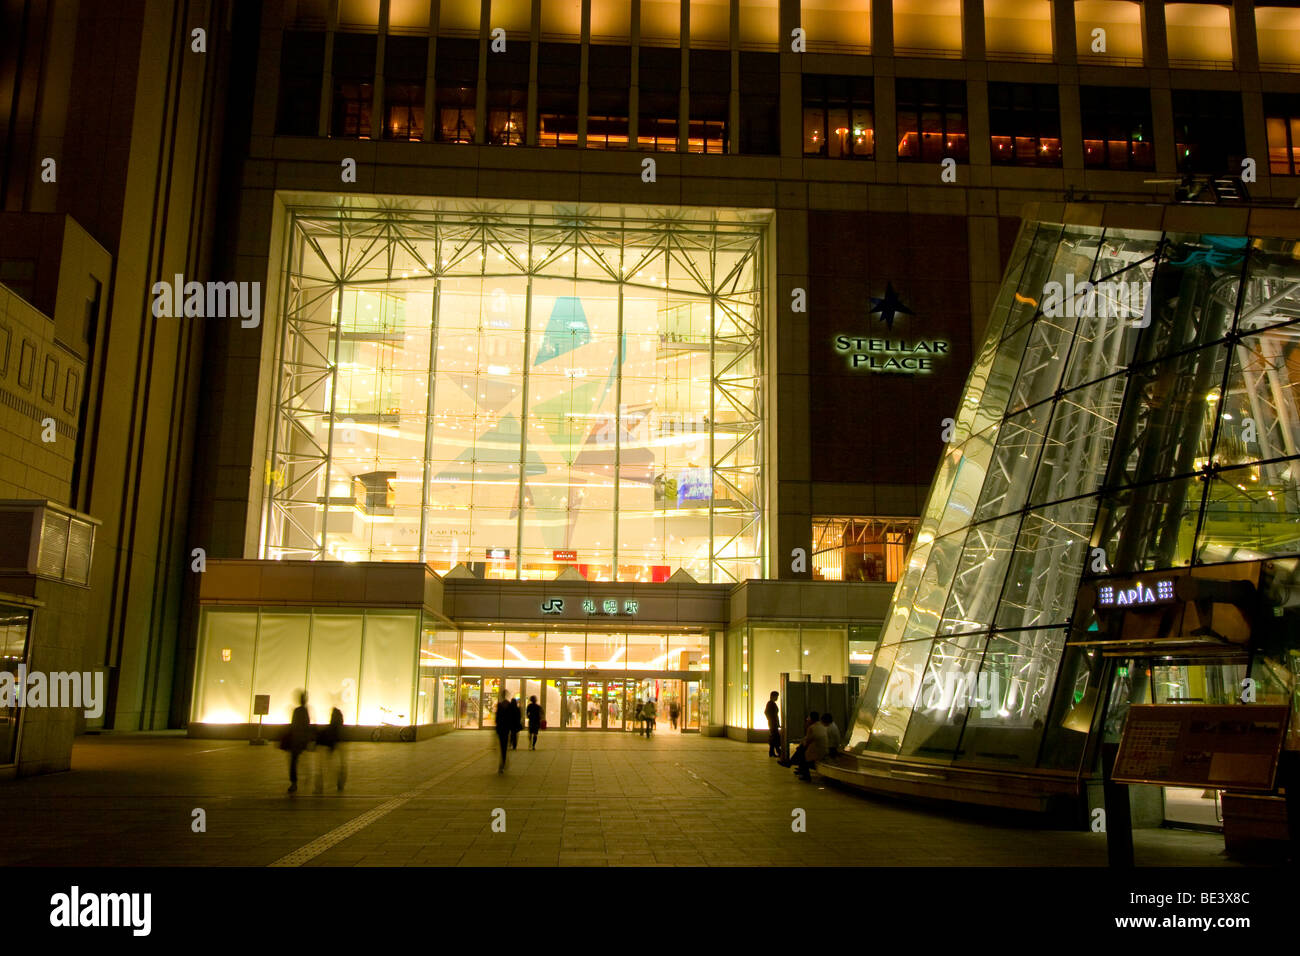 Jr Sapporo Station Is Home To Not Only The Train Station But A Large Shopping Centre With Many Department And Specialty Stores Stock Photo Alamy